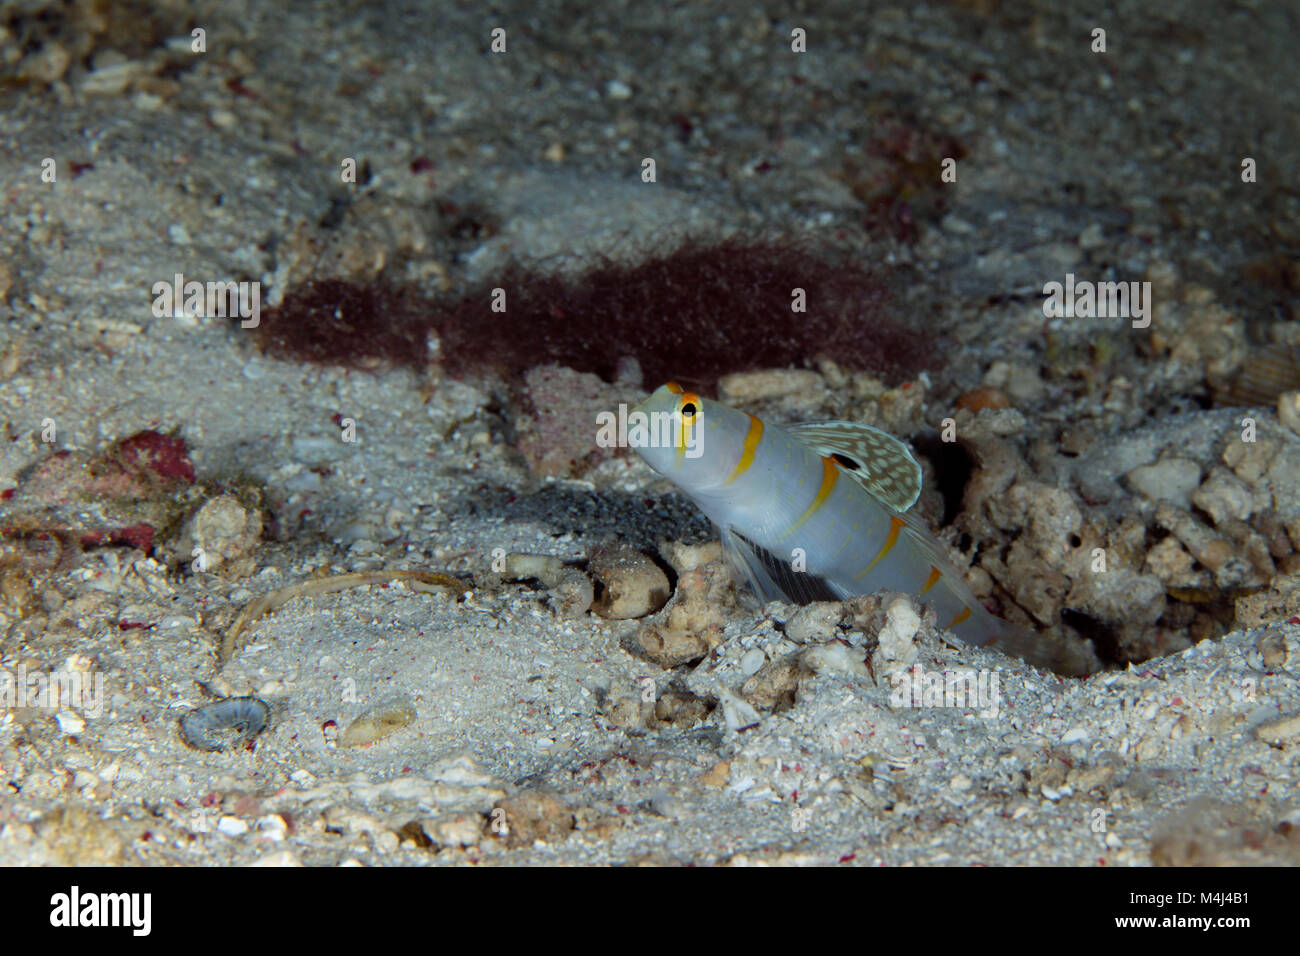 Goby fish. Picture taken on the Panglao Island, Philippines Stock Photo